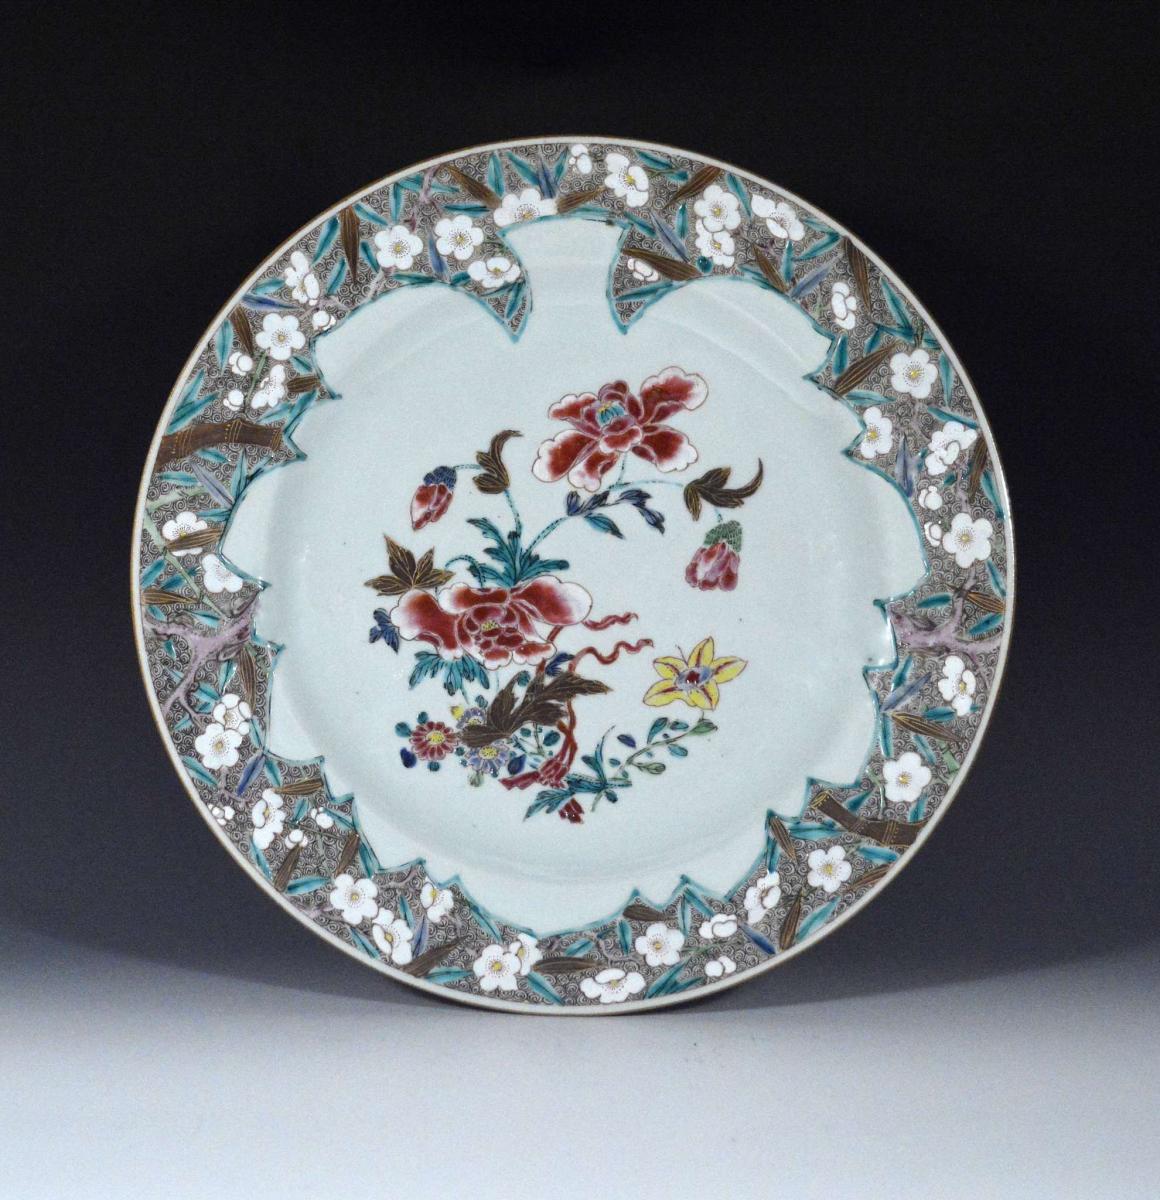 Chinese Export Famille Rose Porcelain Dish, Circa 1730-35